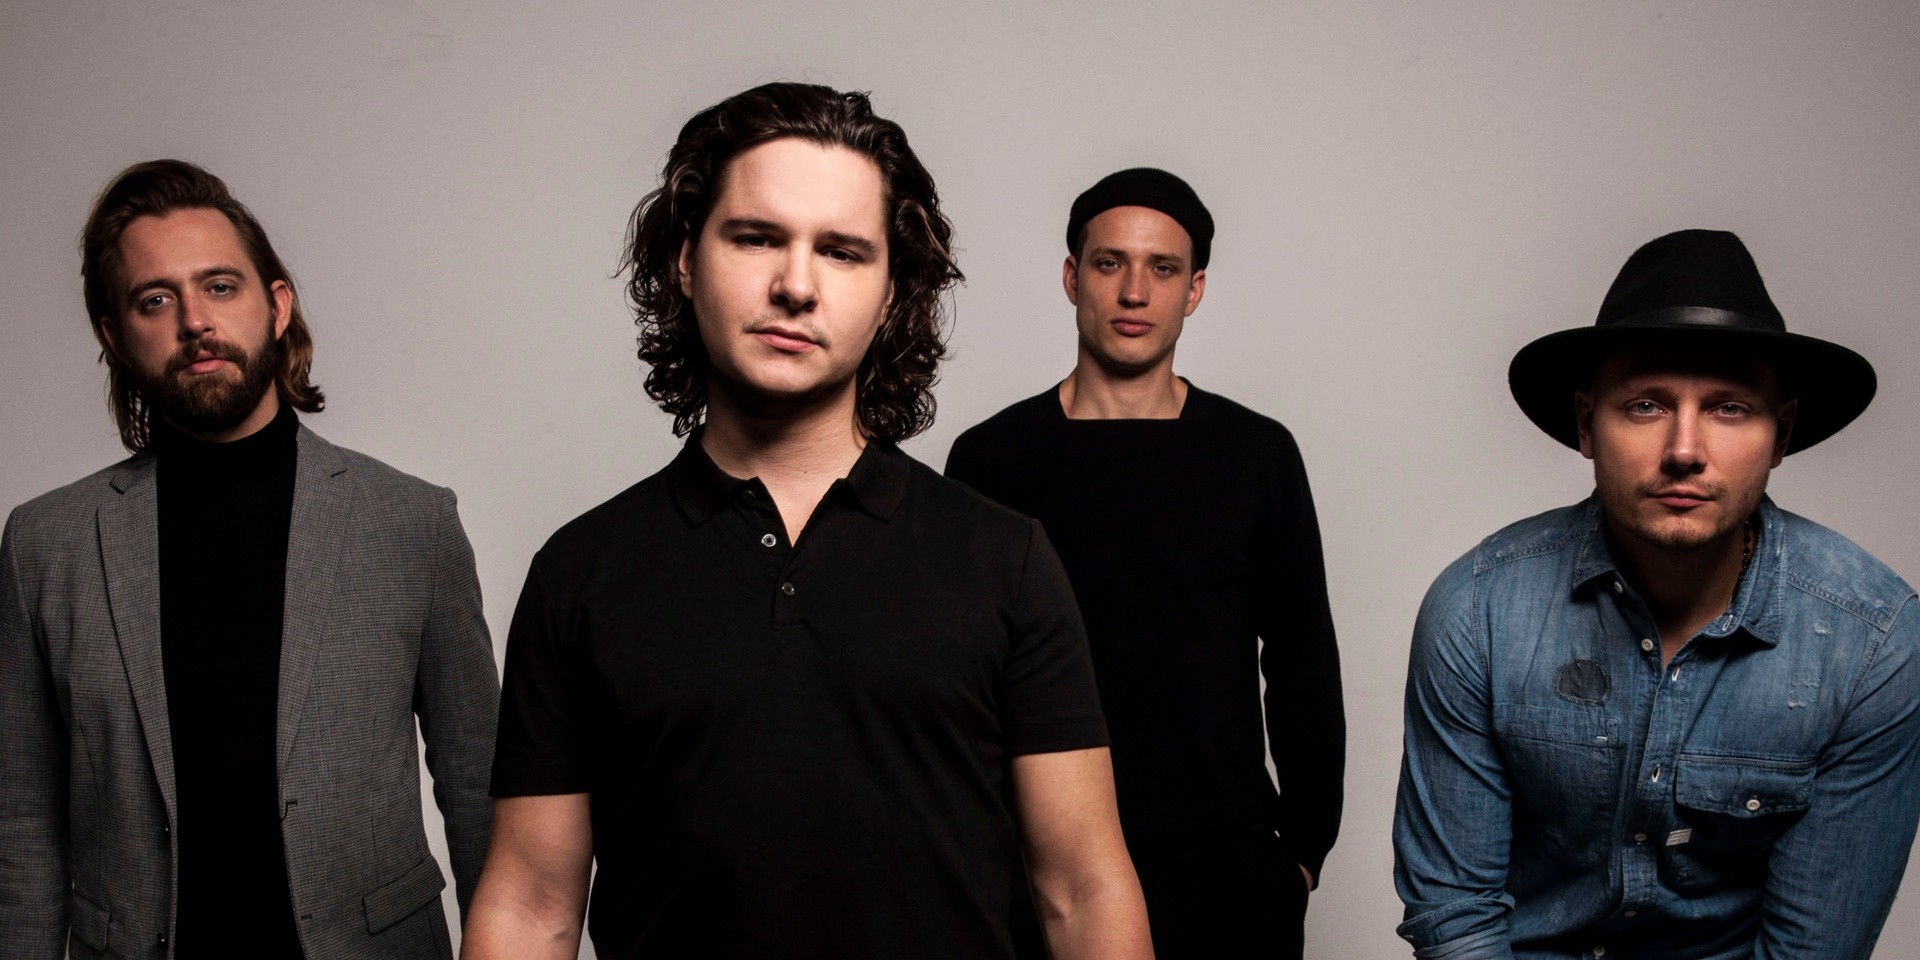 "I'm pretty good under pressure": An interview with Lukas Graham 